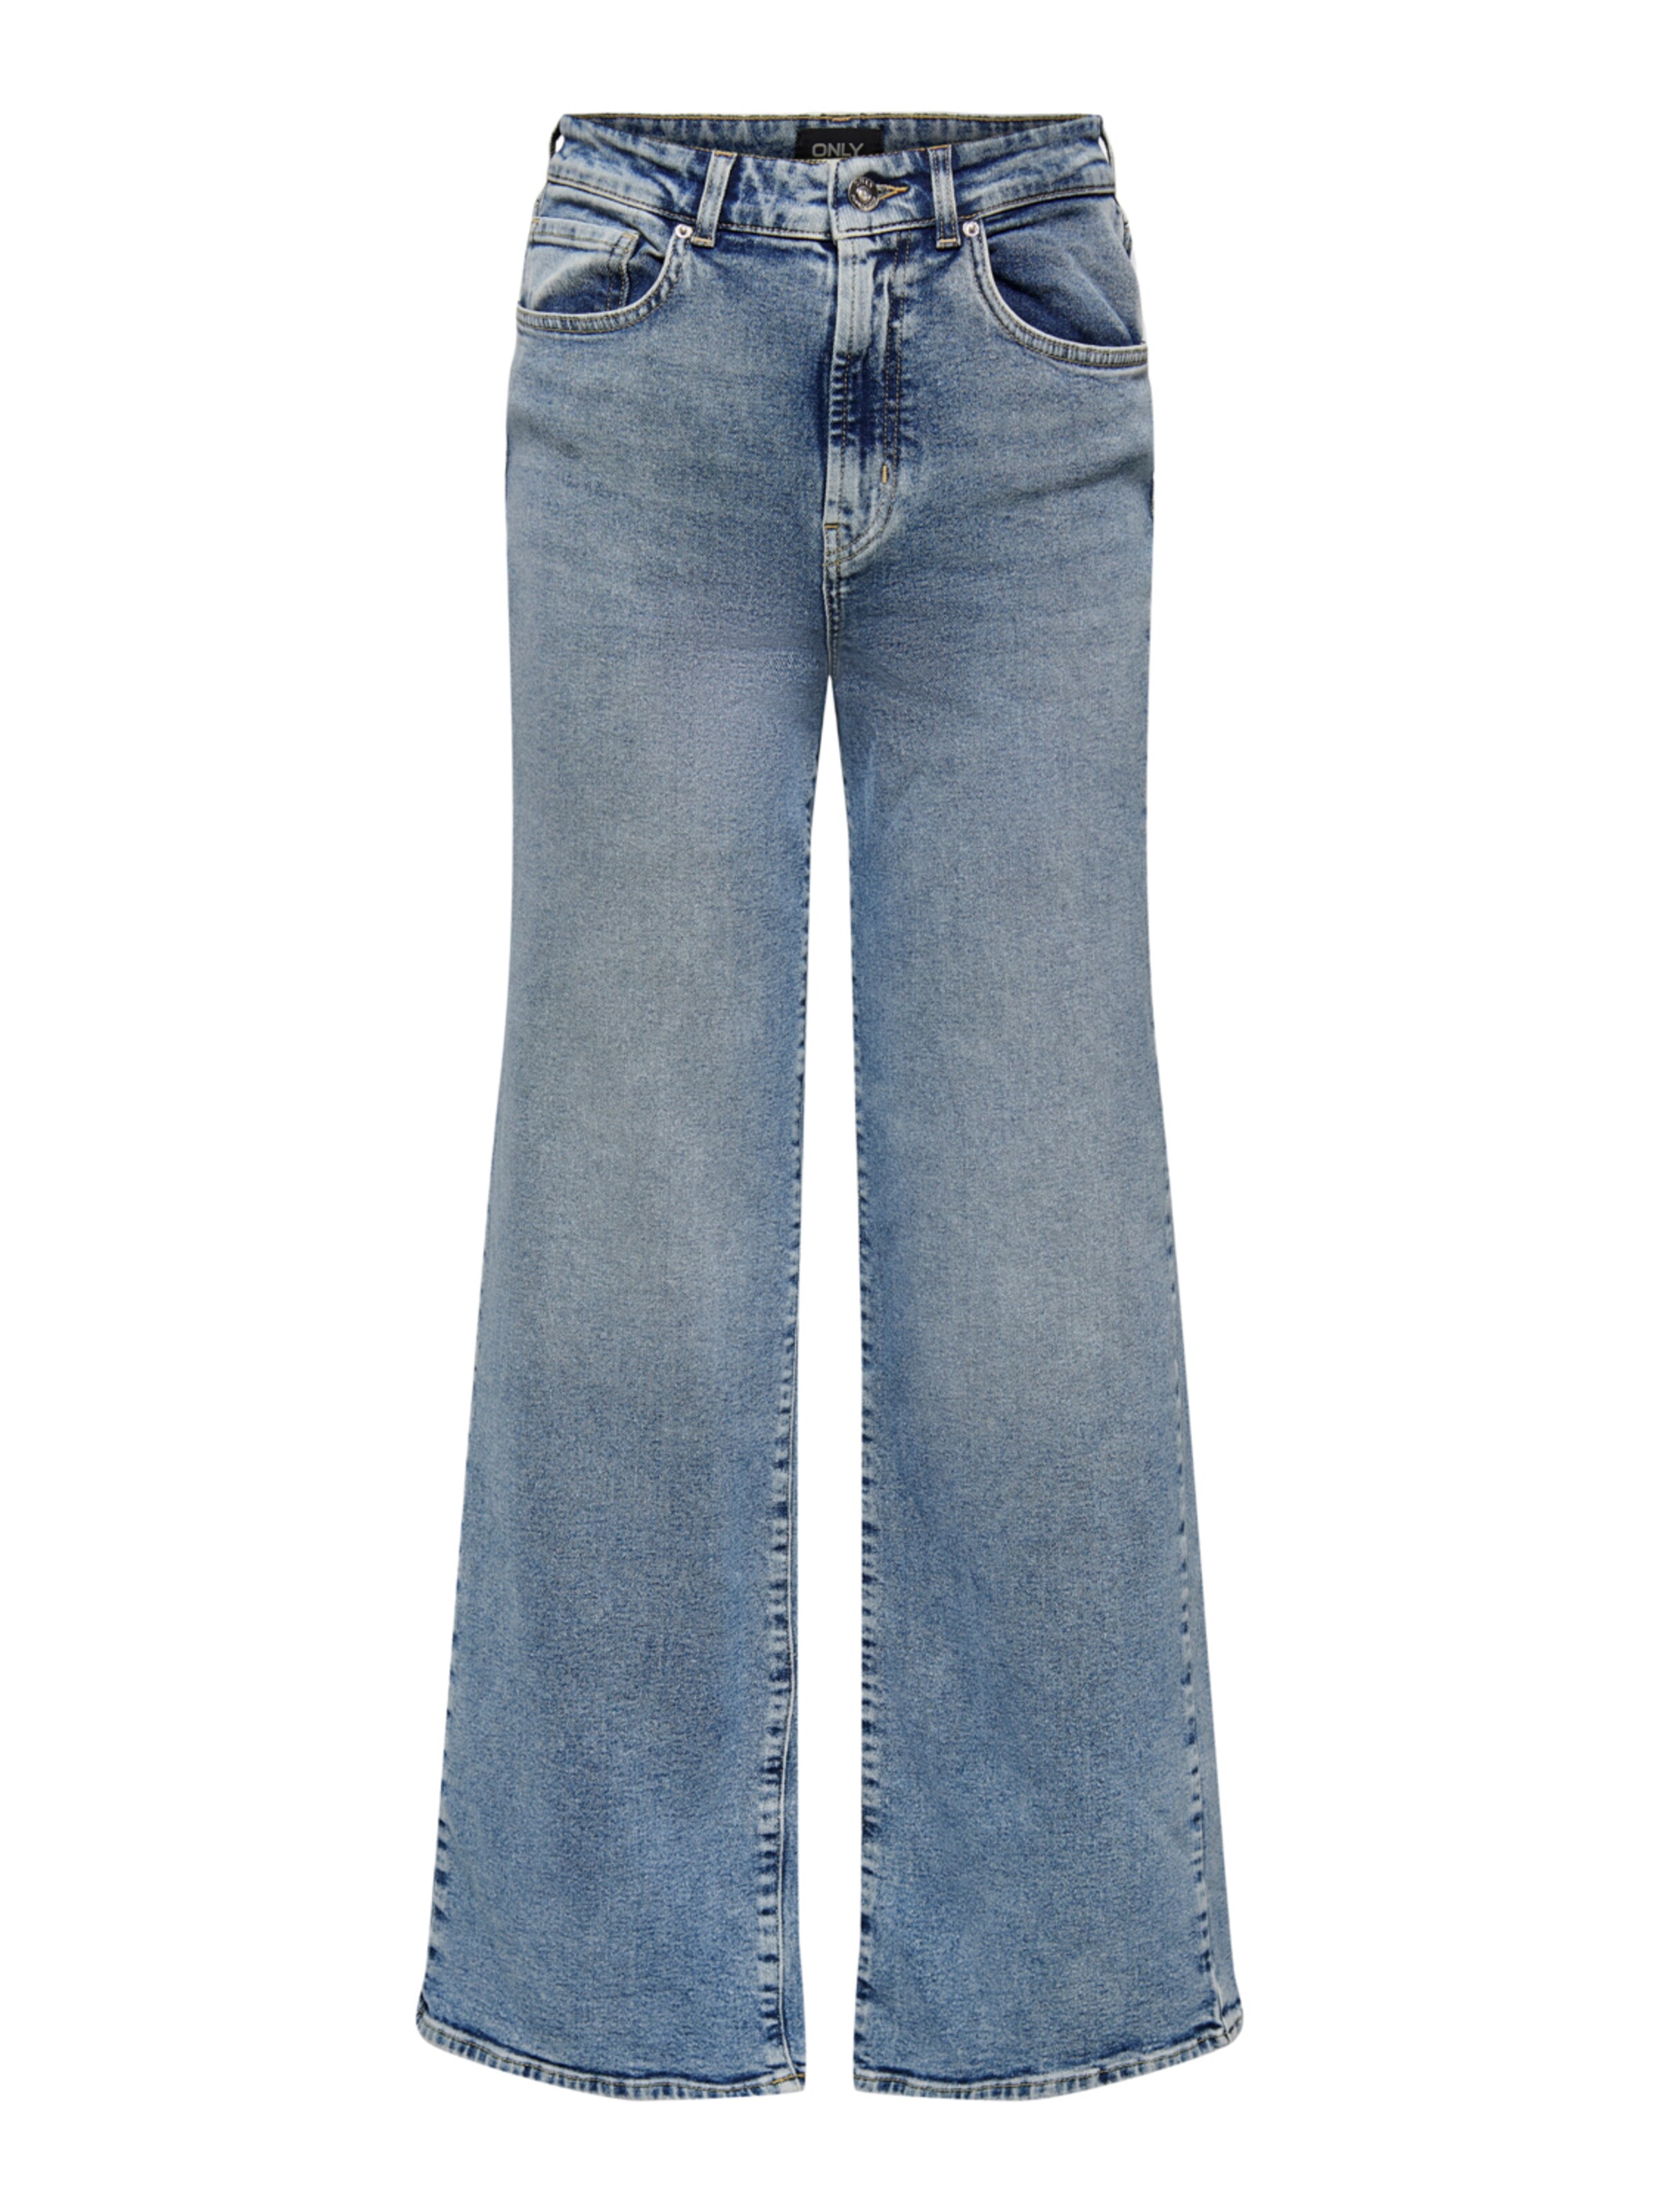 oCVFU Jeans Only Petite Jeans Inc Hope in Blu 